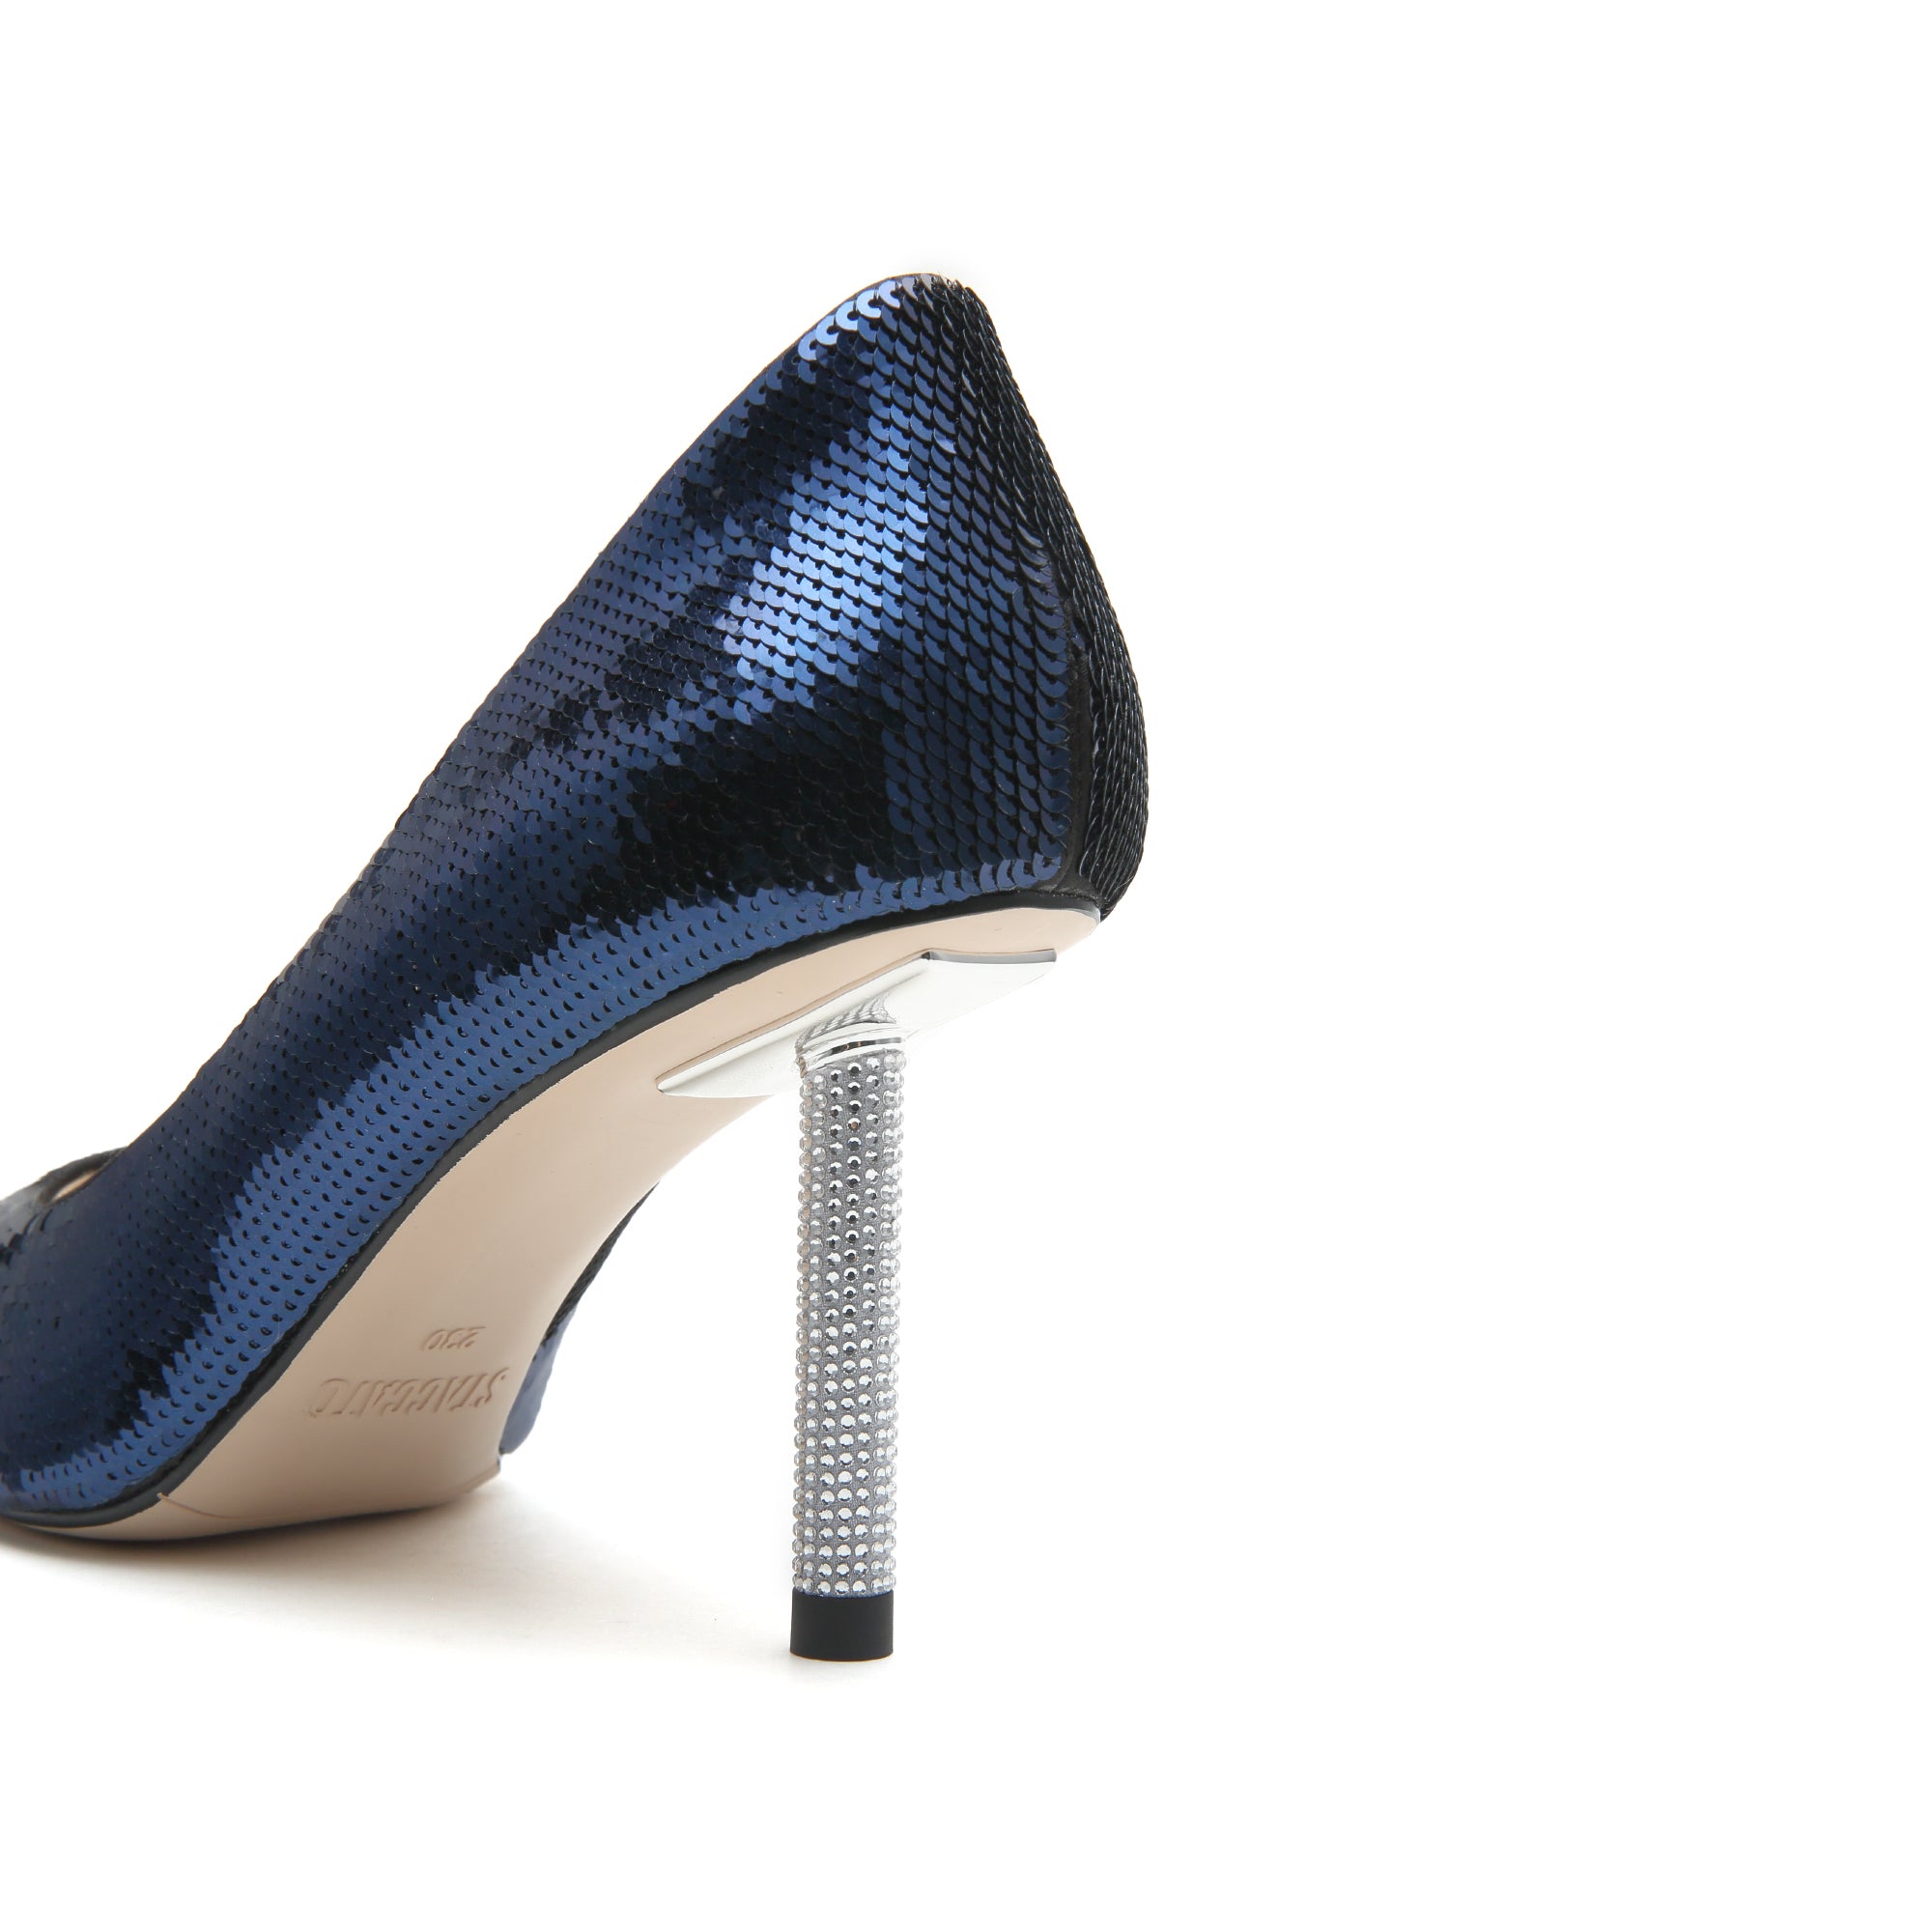 Blue Sequins Pointed Toe Crystal Heeled Pumps